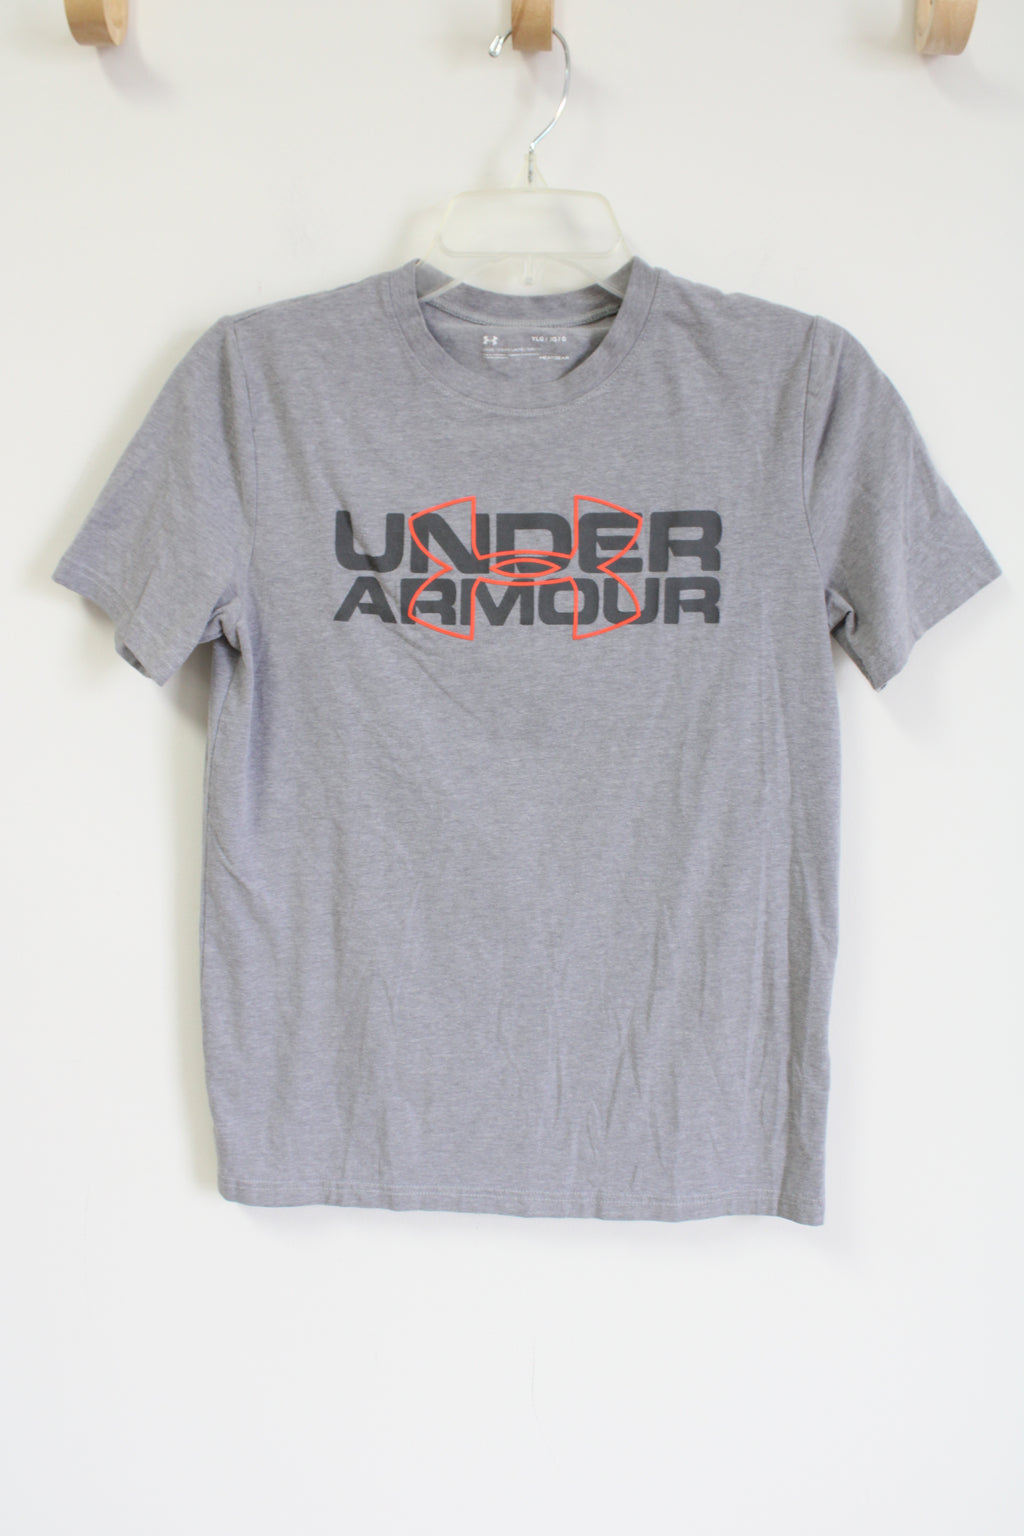 Under Armour Loose Fit HeatGear Gray Tee | Youth L (14/16)